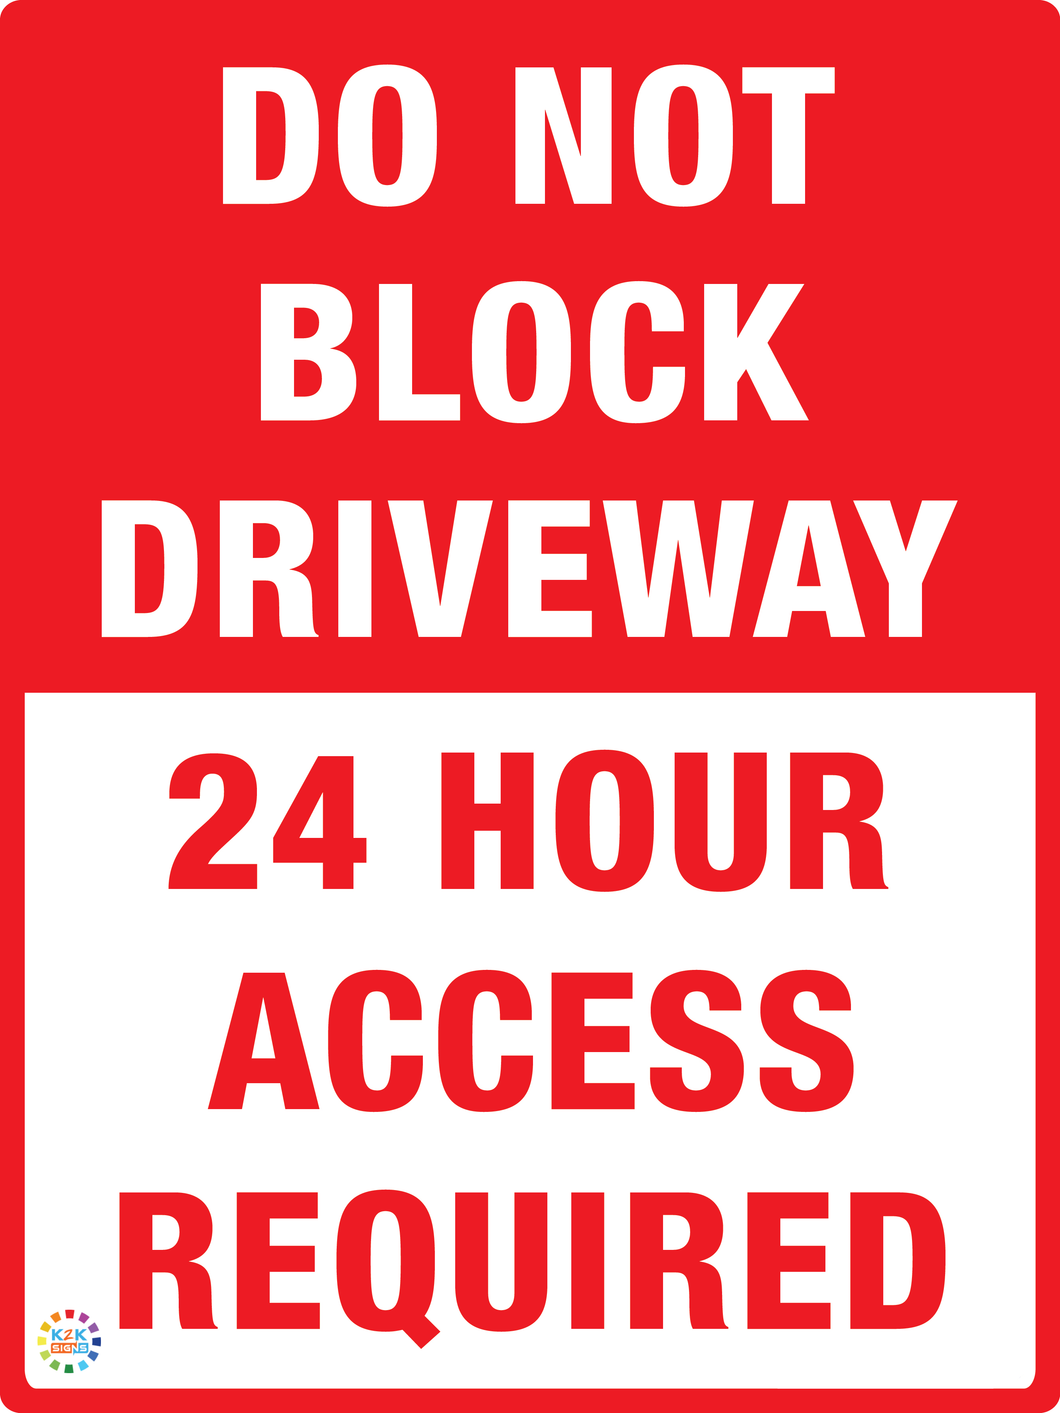 Do Not Block Driveway - 24 Hour Access Required Sign